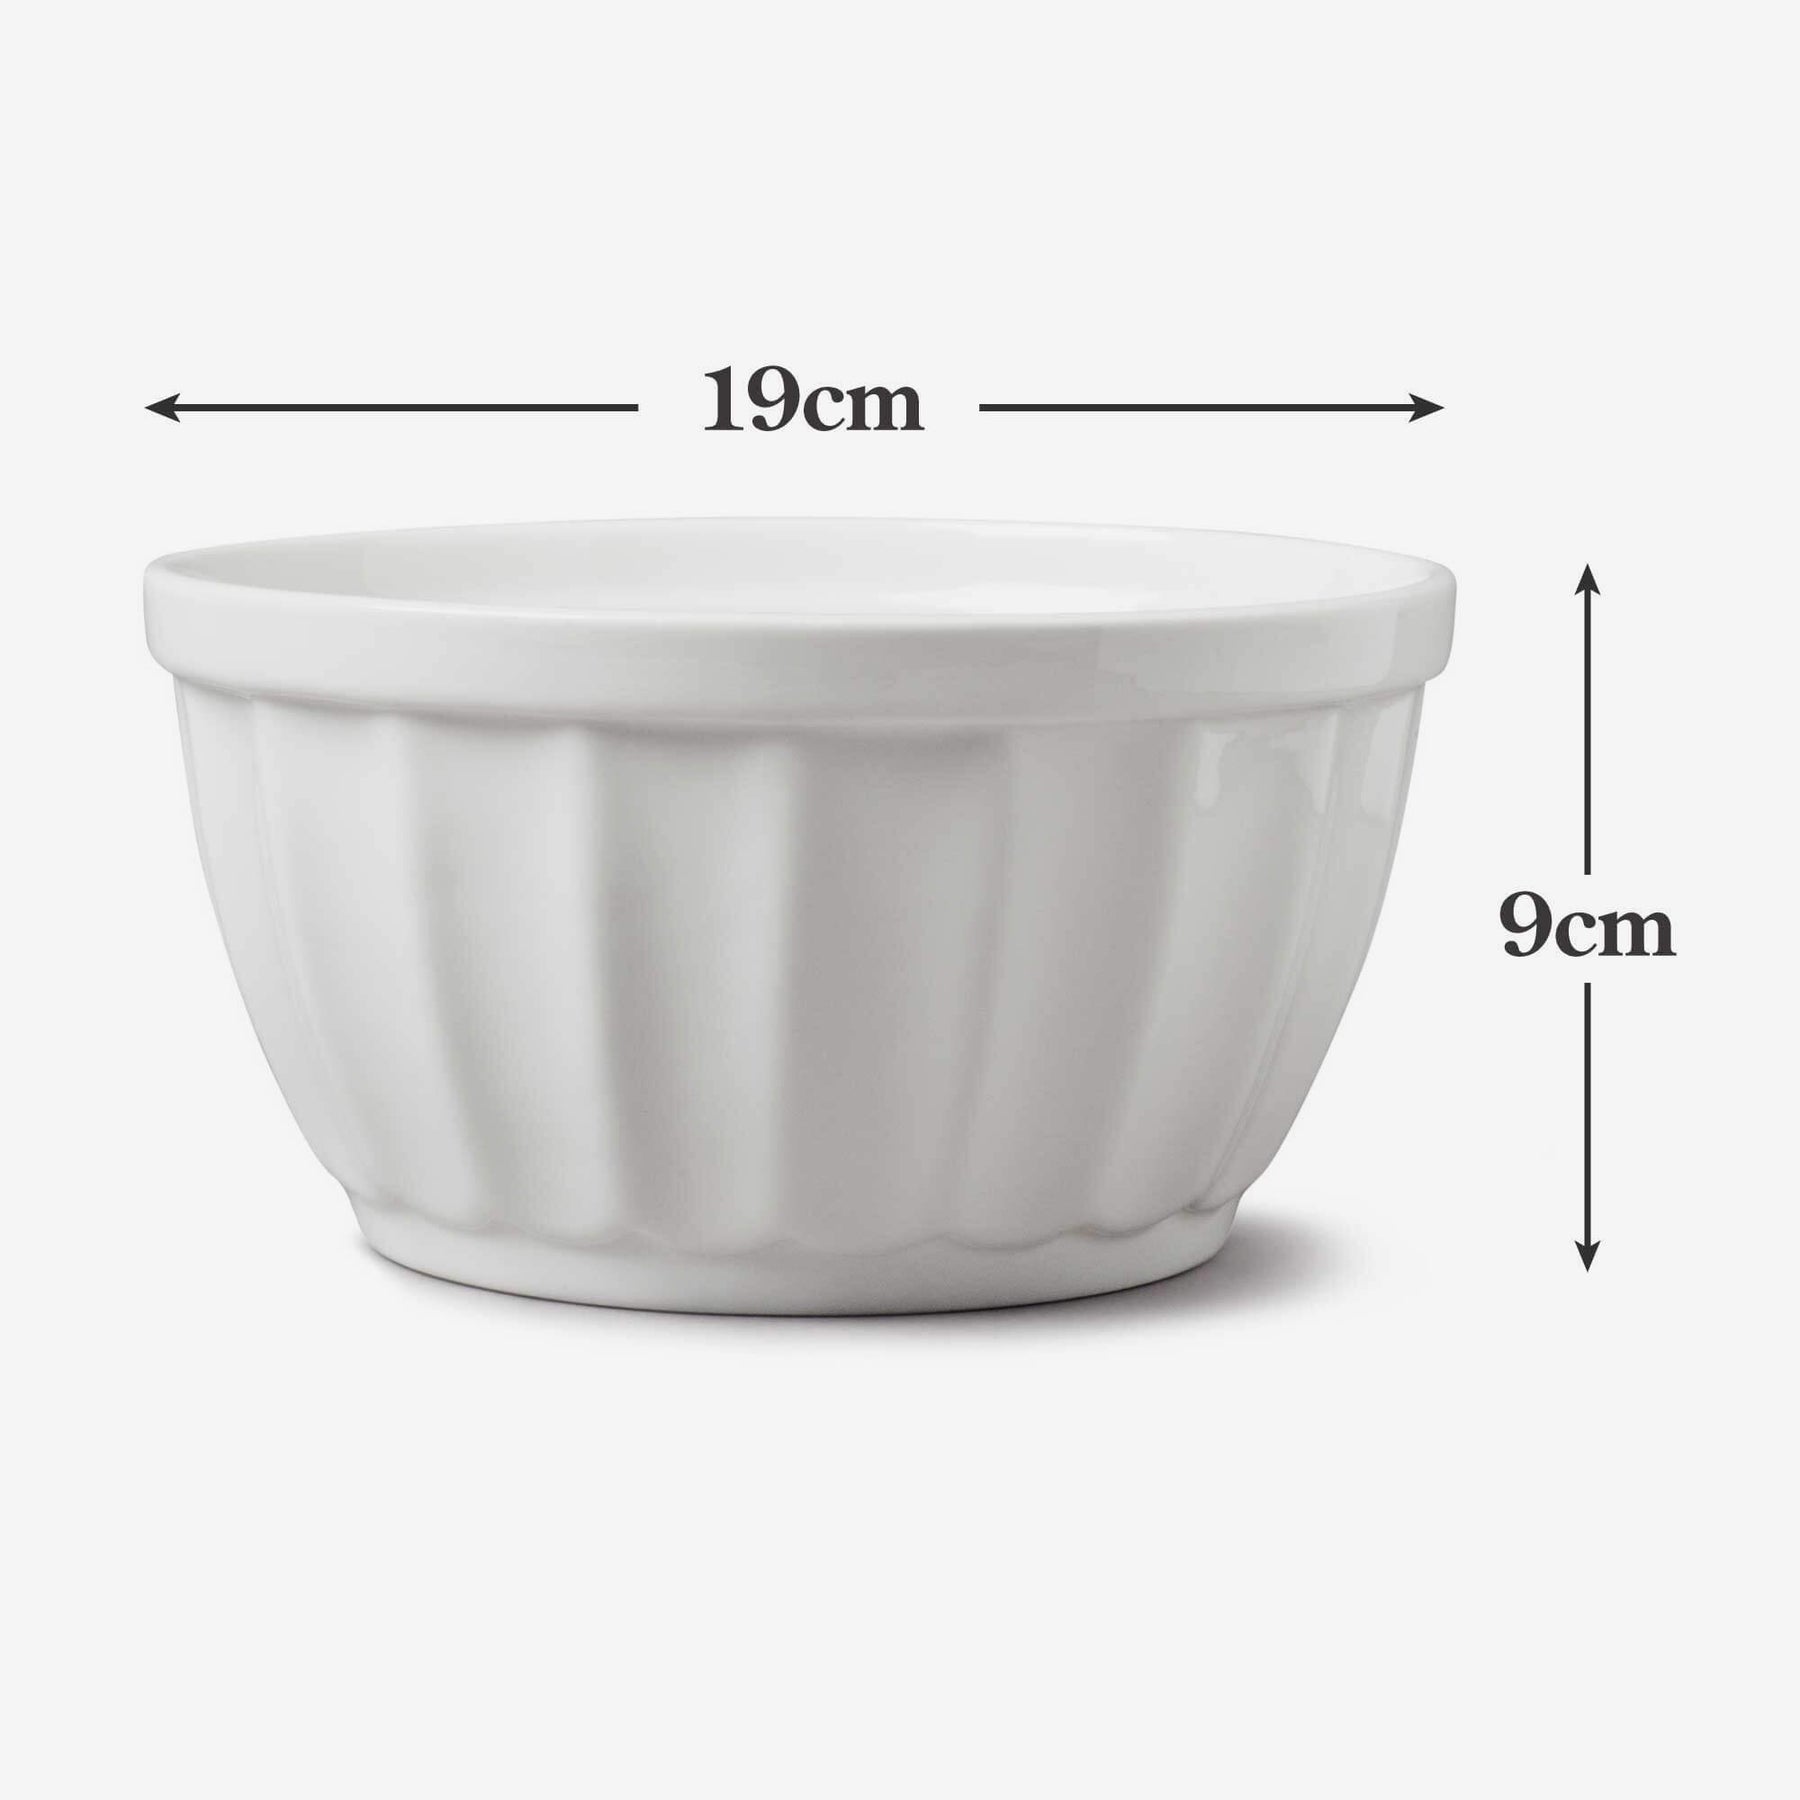 Porcelain Fluted Bowl, Available in 2 Sizes